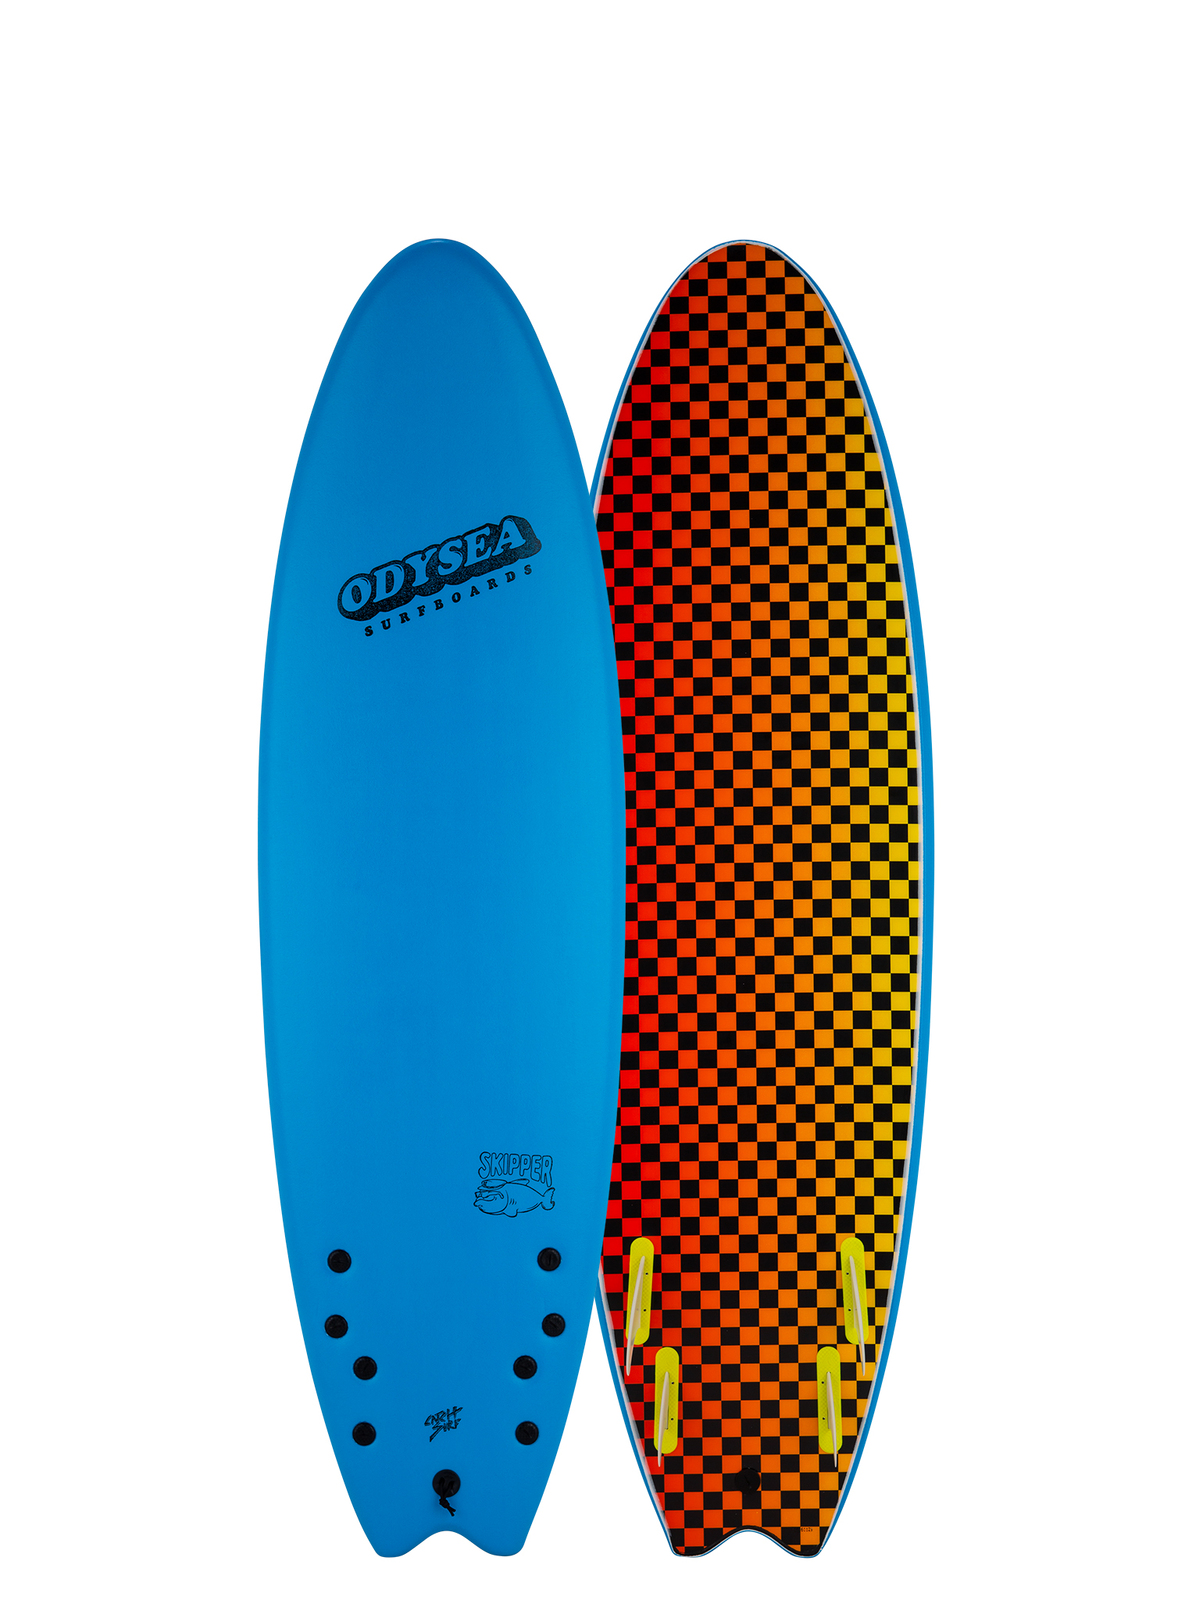 Catch Surf Odysea Skipper 6'6 Quad. This surfboard is designed for 